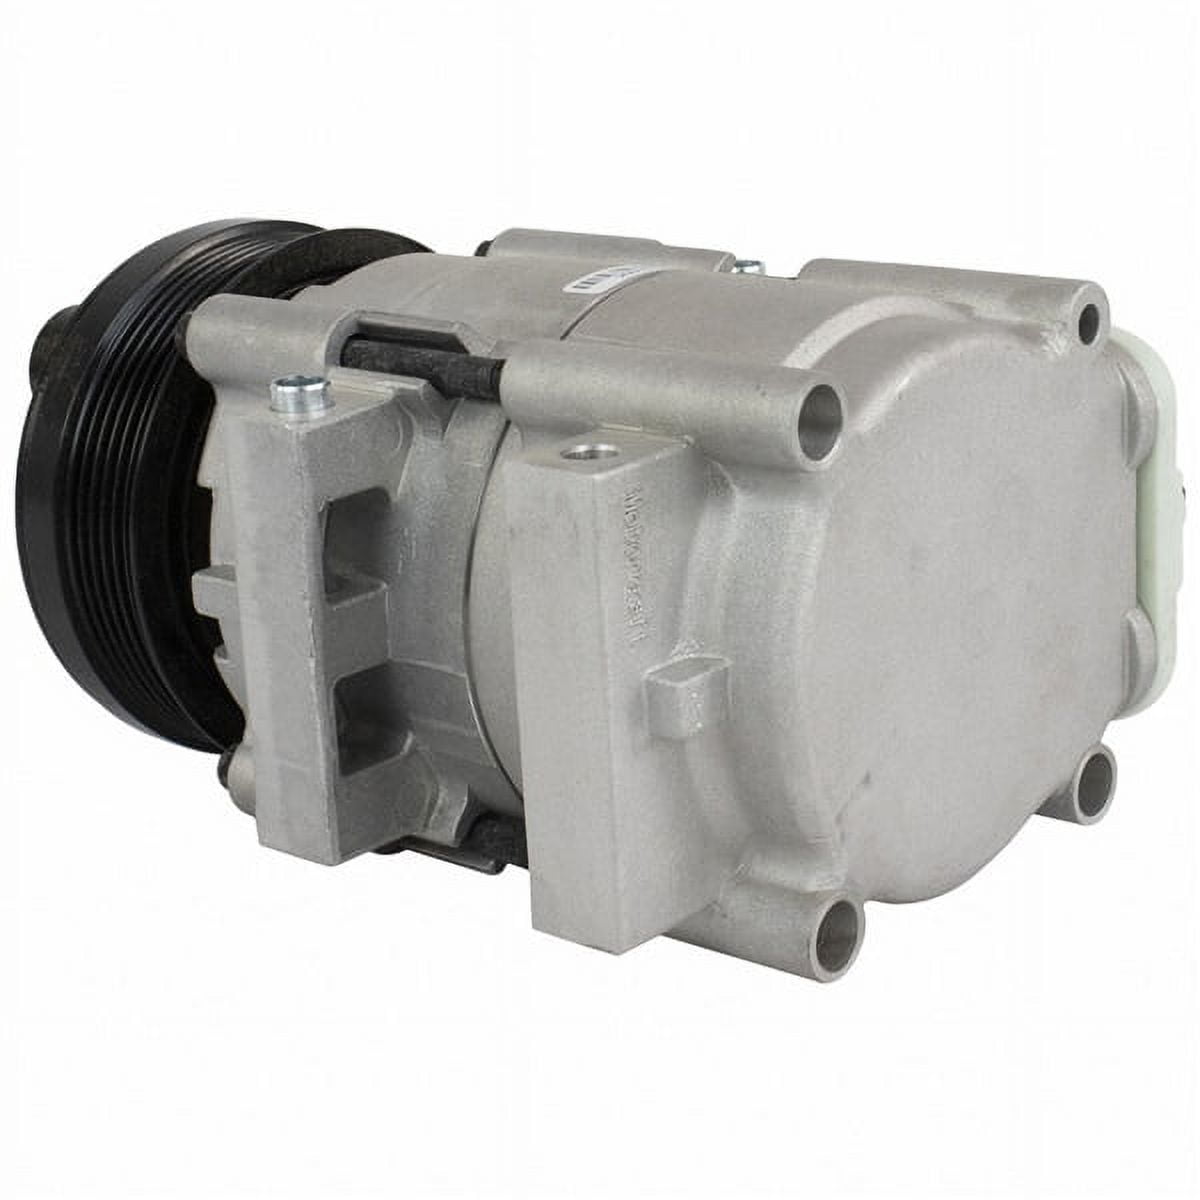 Motorcraft A/C Compressor YCC-495 Fits select: 2004-2005 FORD F150,  1996-2004 FORD MUSTANG